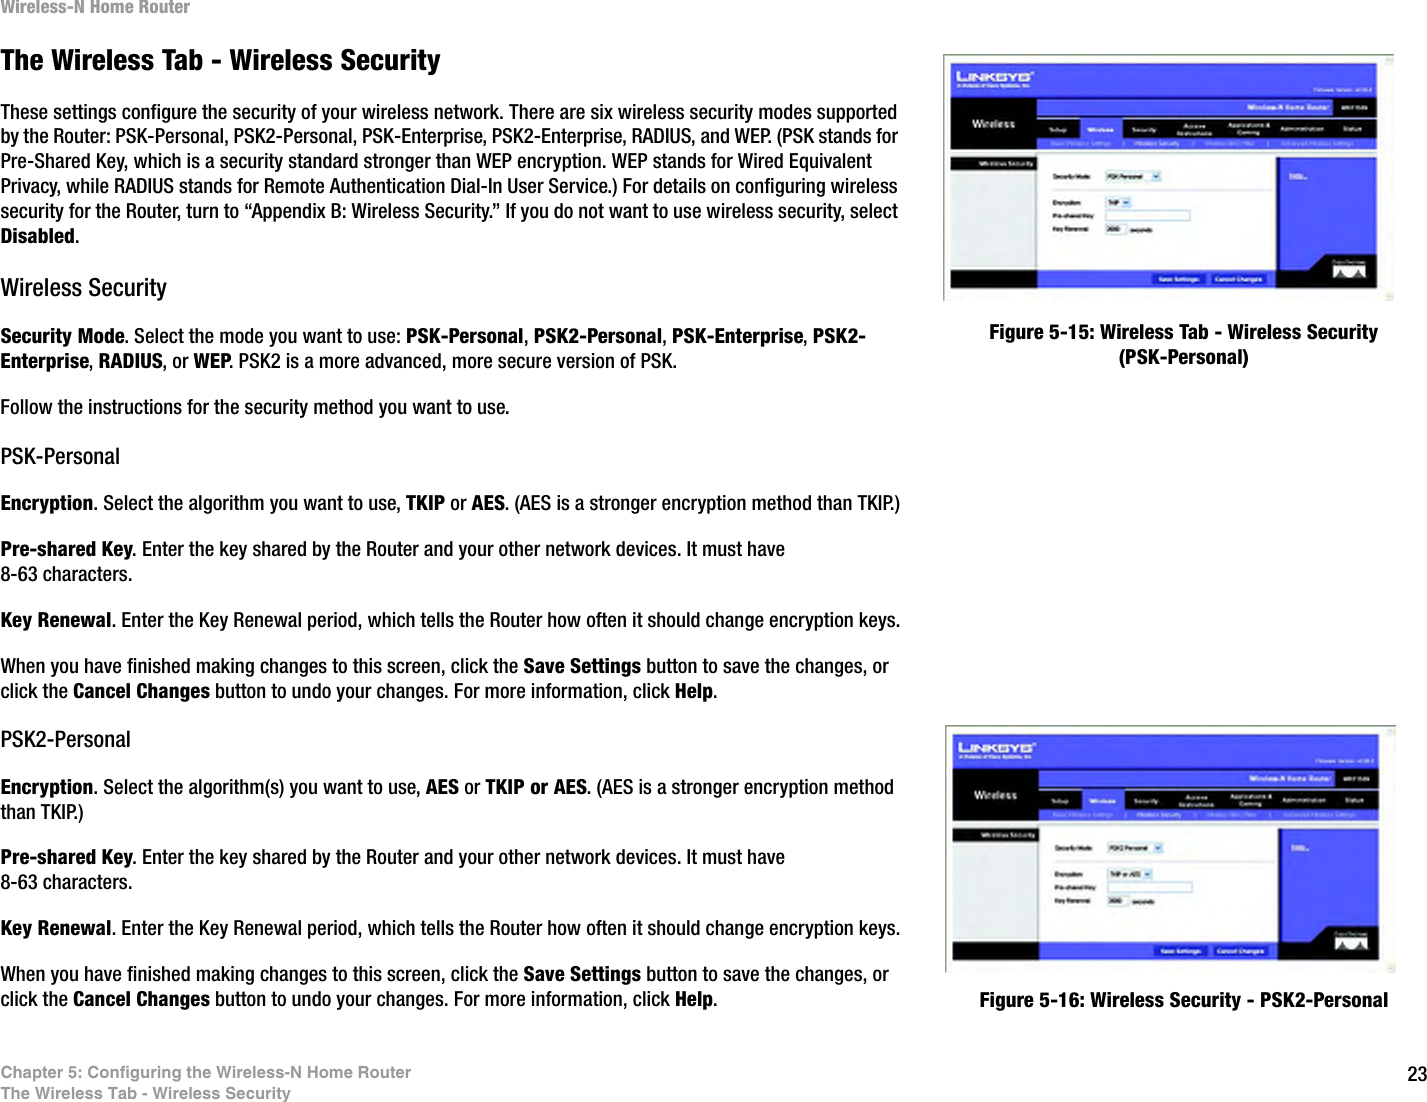 23Chapter 5: Configuring the Wireless-N Home RouterThe Wireless Tab - Wireless SecurityWireless-N Home RouterThe Wireless Tab - Wireless SecurityThese settings configure the security of your wireless network. There are six wireless security modes supported by the Router: PSK-Personal, PSK2-Personal, PSK-Enterprise, PSK2-Enterprise, RADIUS, and WEP. (PSK stands for Pre-Shared Key, which is a security standard stronger than WEP encryption. WEP stands for Wired Equivalent Privacy, while RADIUS stands for Remote Authentication Dial-In User Service.) For details on configuring wireless security for the Router, turn to “Appendix B: Wireless Security.” If you do not want to use wireless security, select Disabled.Wireless SecuritySecurity Mode. Select the mode you want to use: PSK-Personal, PSK2-Personal, PSK-Enterprise, PSK2-Enterprise, RADIUS, or WEP. PSK2 is a more advanced, more secure version of PSK.Follow the instructions for the security method you want to use. PSK-PersonalEncryption. Select the algorithm you want to use, TKIP or AES. (AES is a stronger encryption method than TKIP.)Pre-shared Key. Enter the key shared by the Router and your other network devices. It must have 8-63 characters.Key Renewal. Enter the Key Renewal period, which tells the Router how often it should change encryption keys.When you have finished making changes to this screen, click the Save Settings button to save the changes, or click the Cancel Changes button to undo your changes. For more information, click Help.PSK2-PersonalEncryption. Select the algorithm(s) you want to use, AES or TKIP or AES. (AES is a stronger encryption method than TKIP.)Pre-shared Key. Enter the key shared by the Router and your other network devices. It must have 8-63 characters.Key Renewal. Enter the Key Renewal period, which tells the Router how often it should change encryption keys.When you have finished making changes to this screen, click the Save Settings button to save the changes, or click the Cancel Changes button to undo your changes. For more information, click Help.Figure 5-15: Wireless Tab - Wireless Security (PSK-Personal)Figure 5-16: Wireless Security - PSK2-Personal